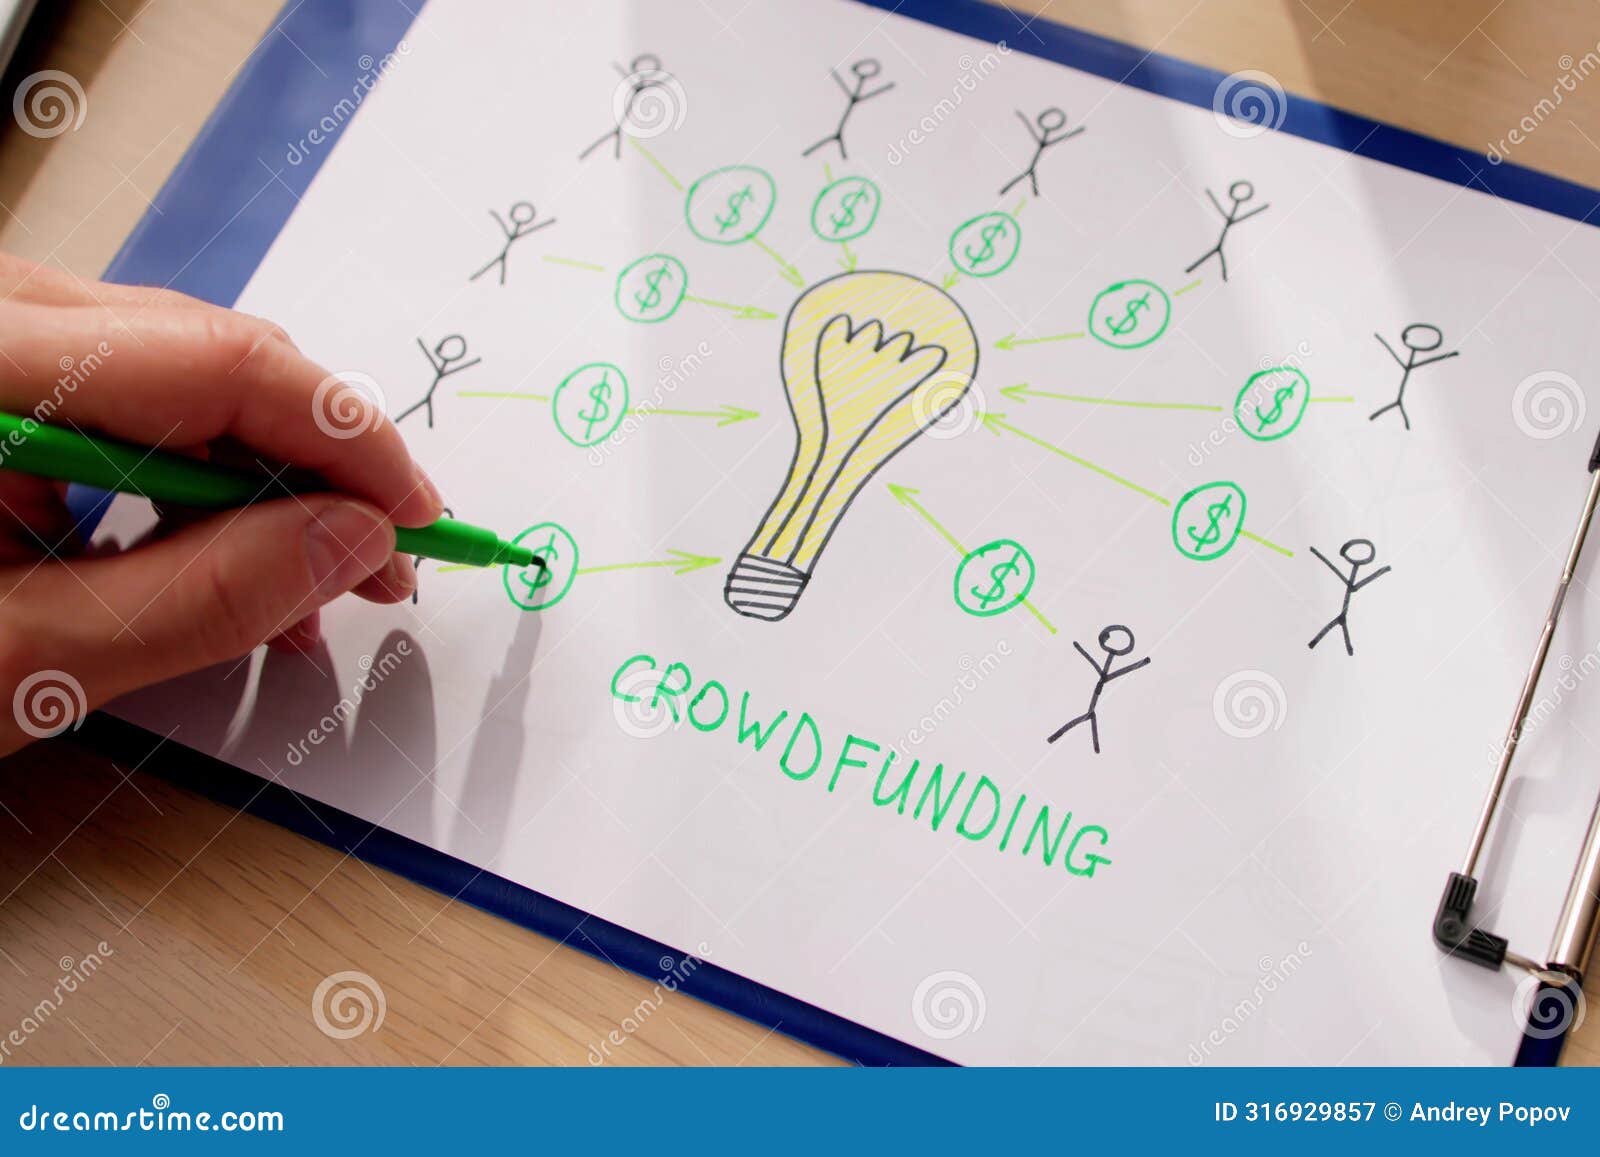 businessperson drawing crowdfunding concept on paper